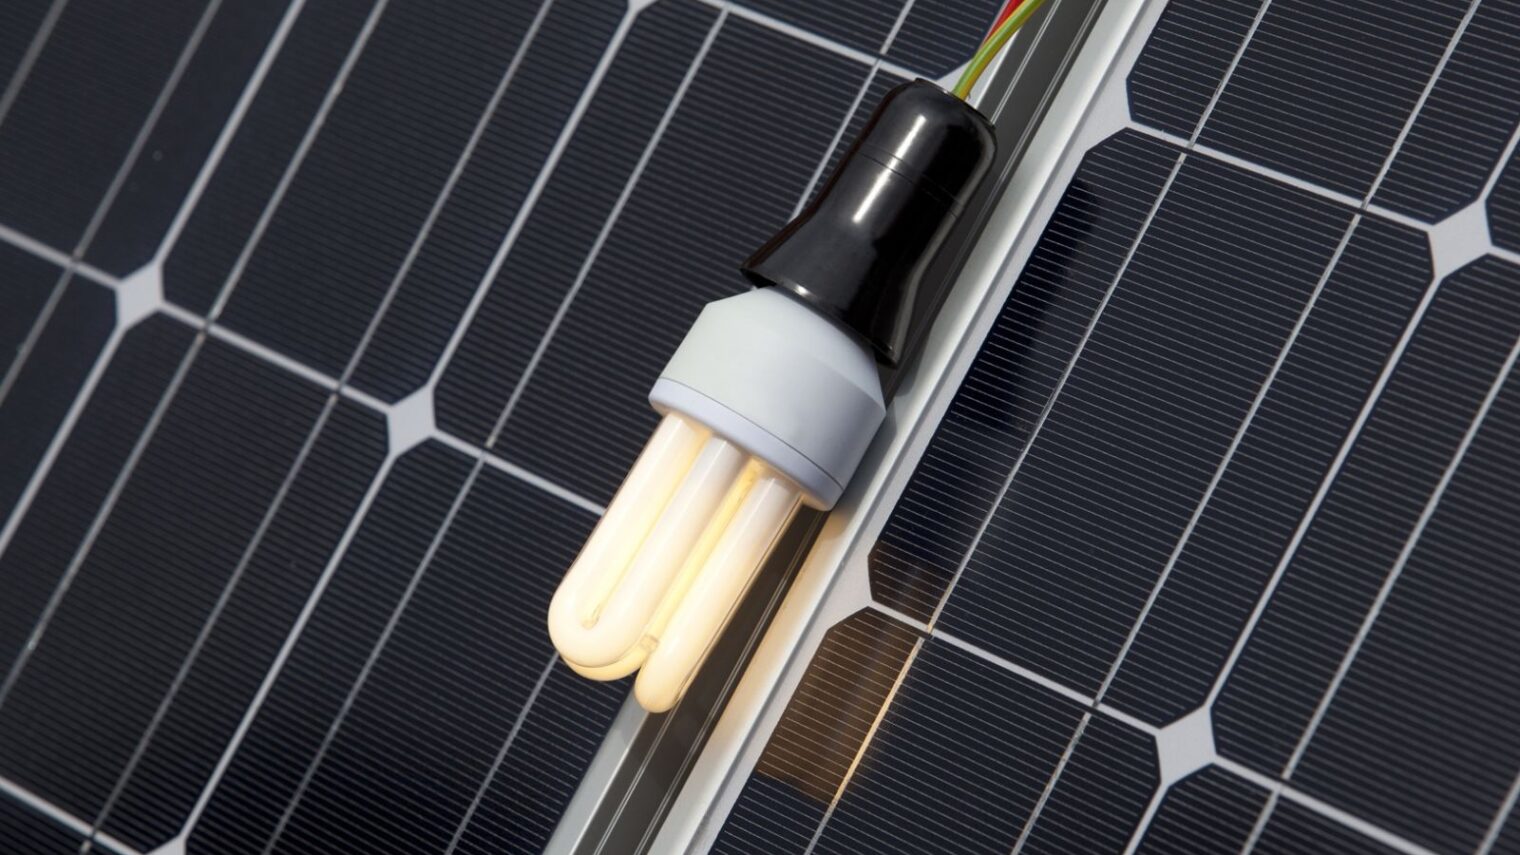 A “lightbulb” moment in the PV cell-making business. Image via Shutterstock.com